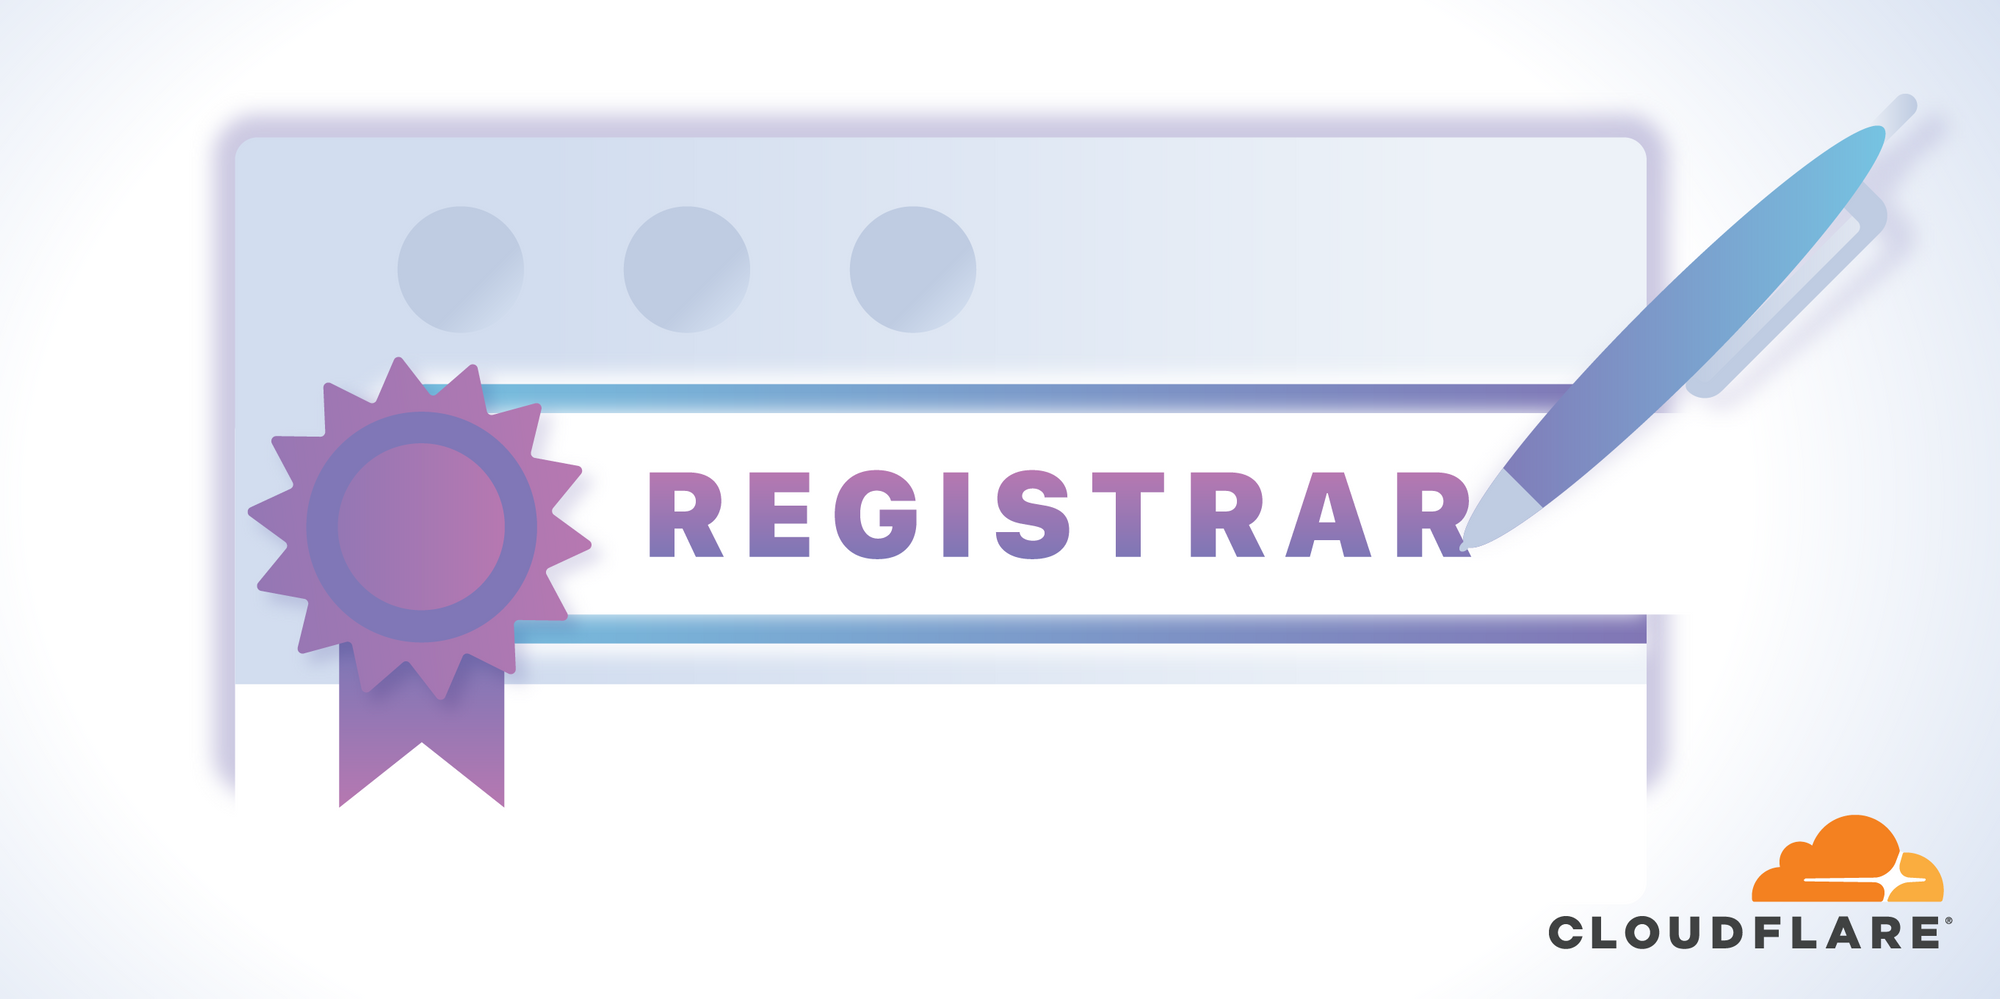 Introducing Cloudflare Registrar: Domain Registration You Can Love